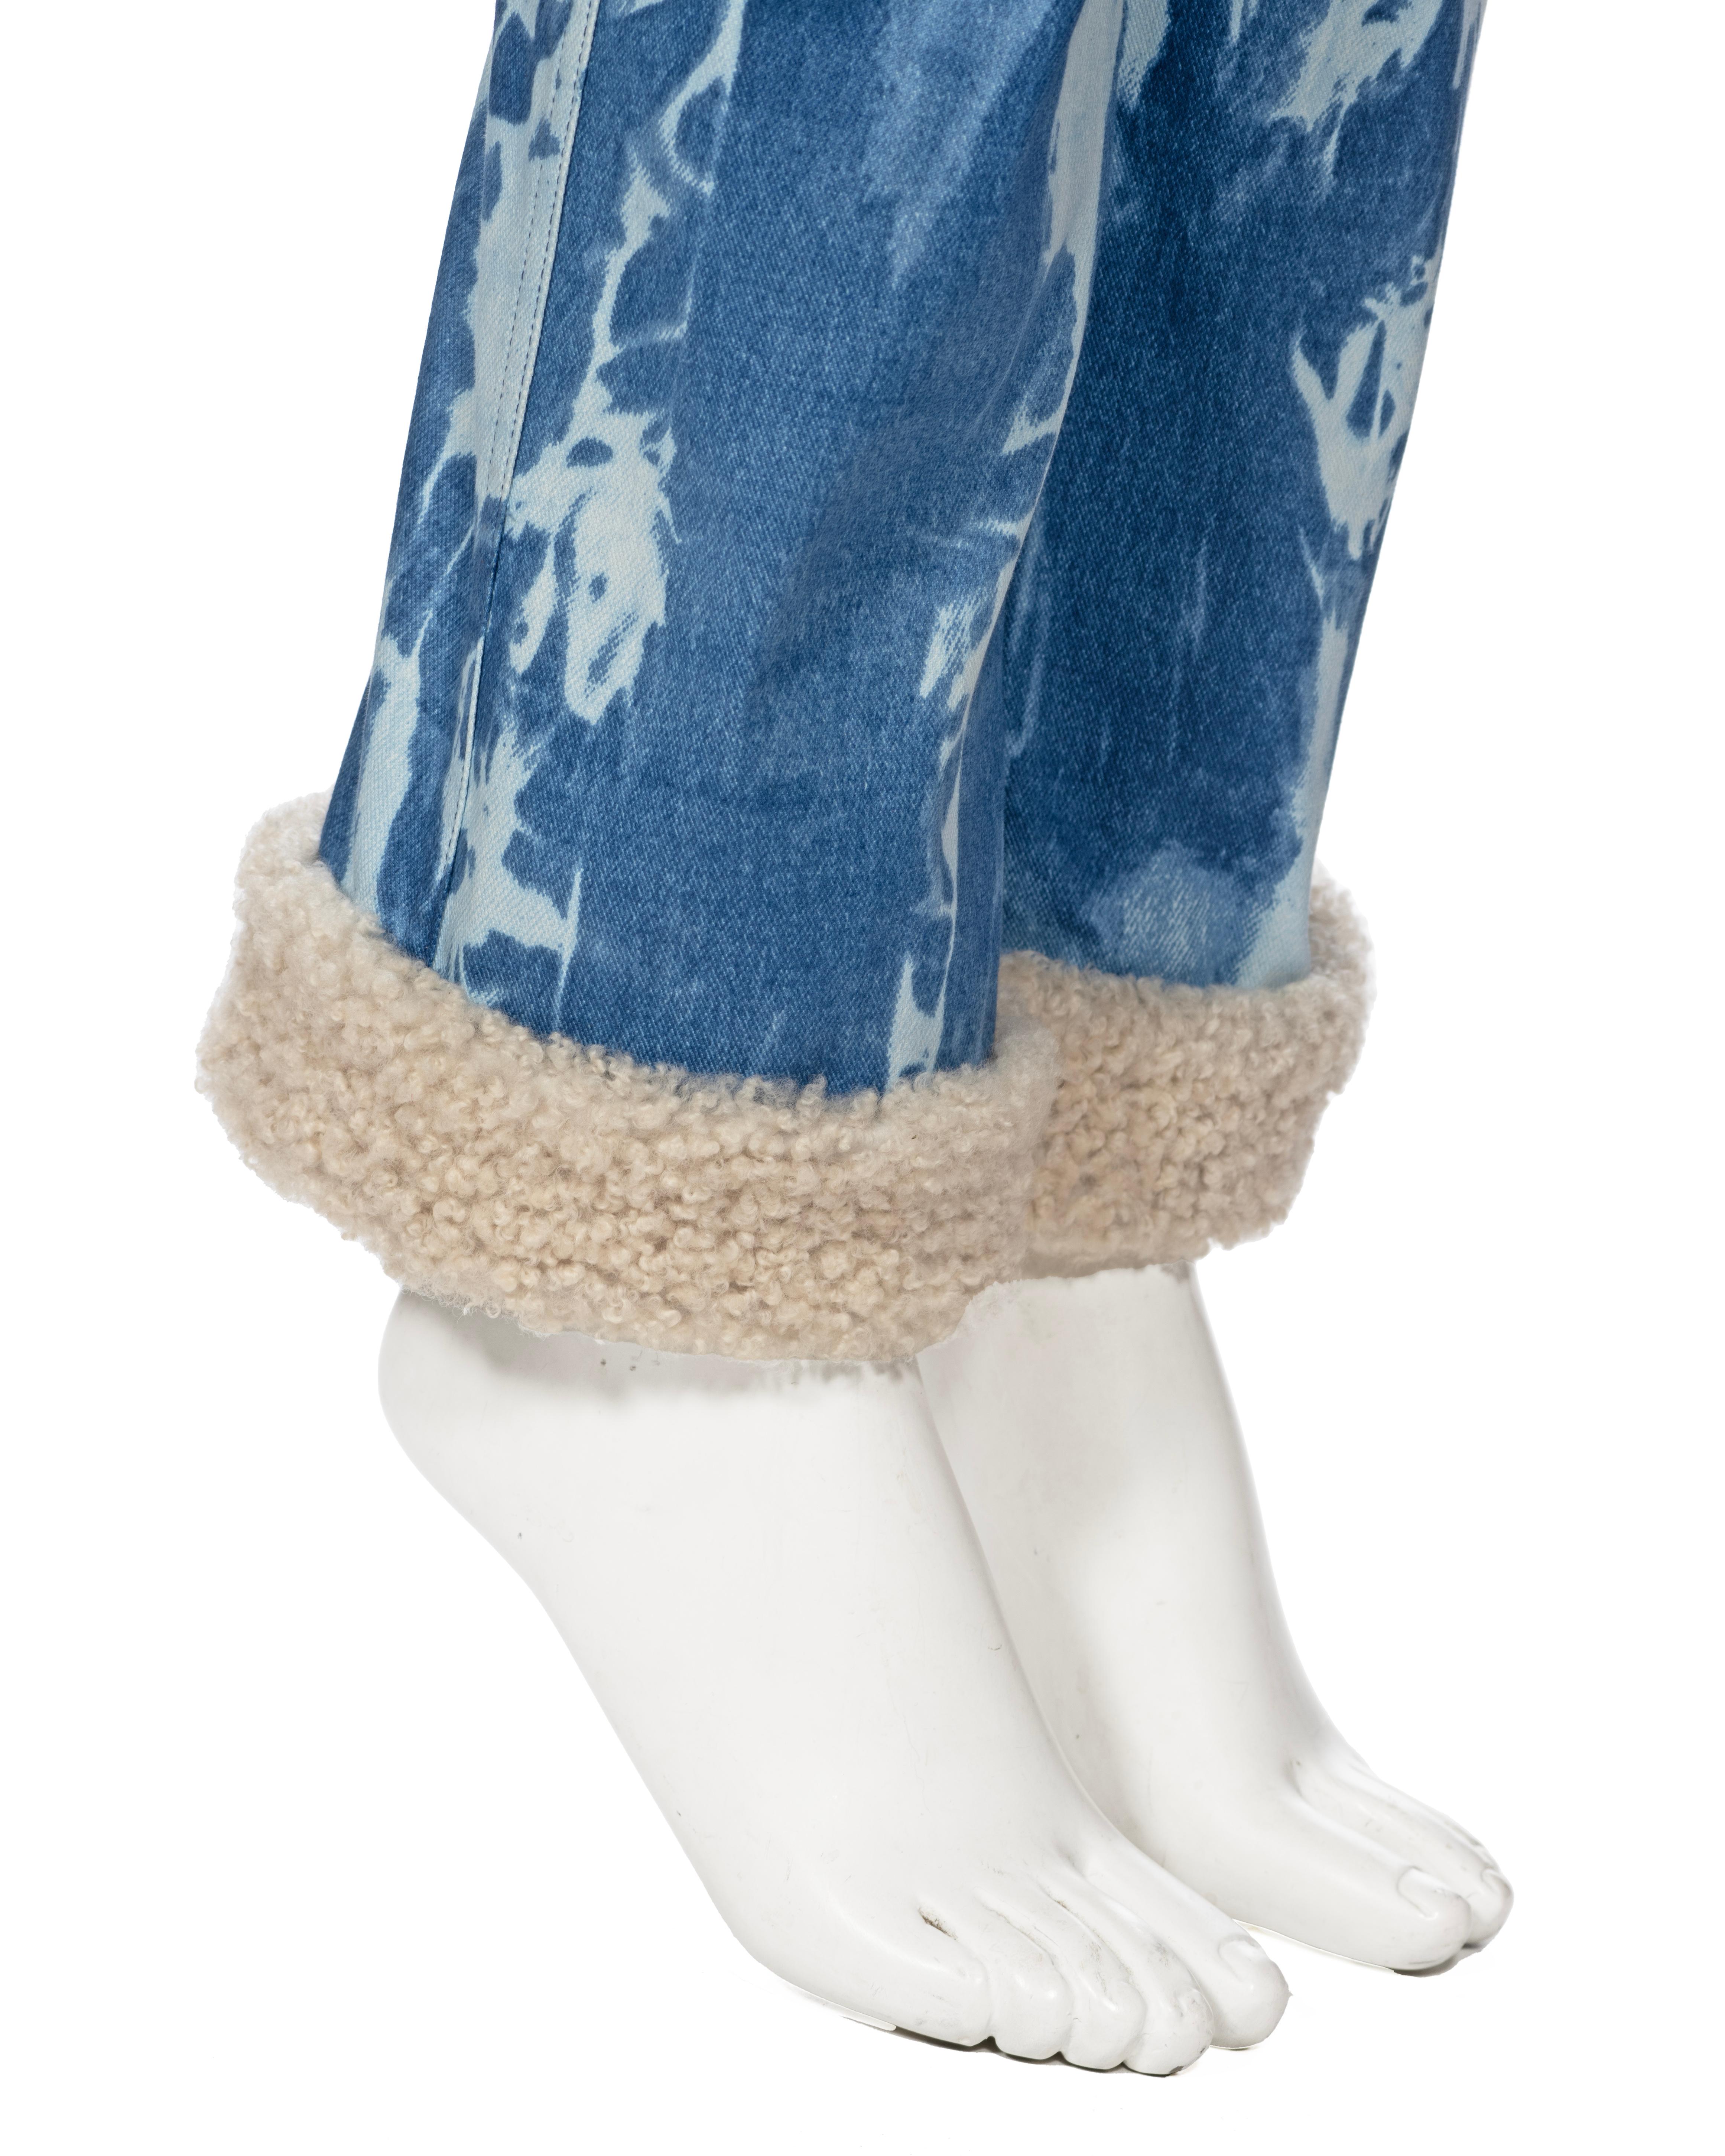 Christian Dior by John Galliano Bleached-Denim and Shearling Pants, fw 2000 For Sale 2